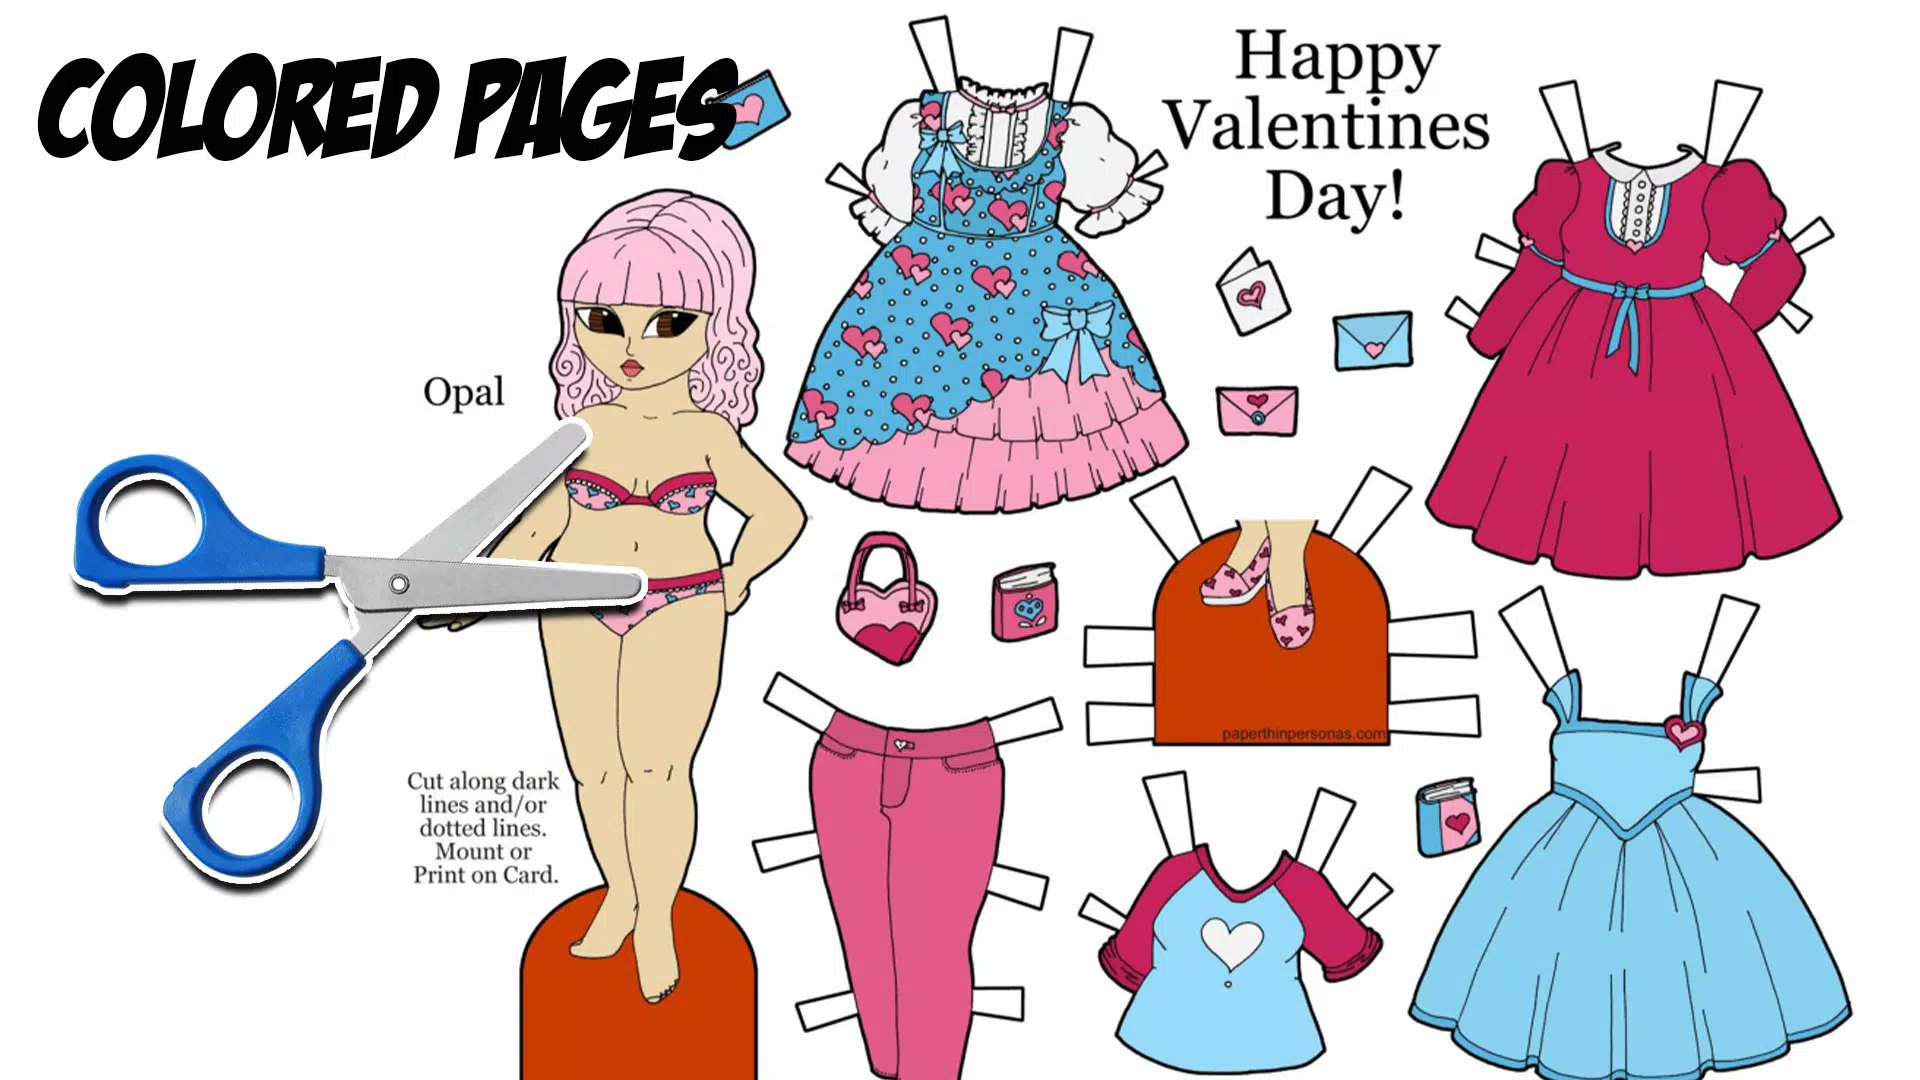 Paper Toca Dolls of Boca Craft for Android - Download